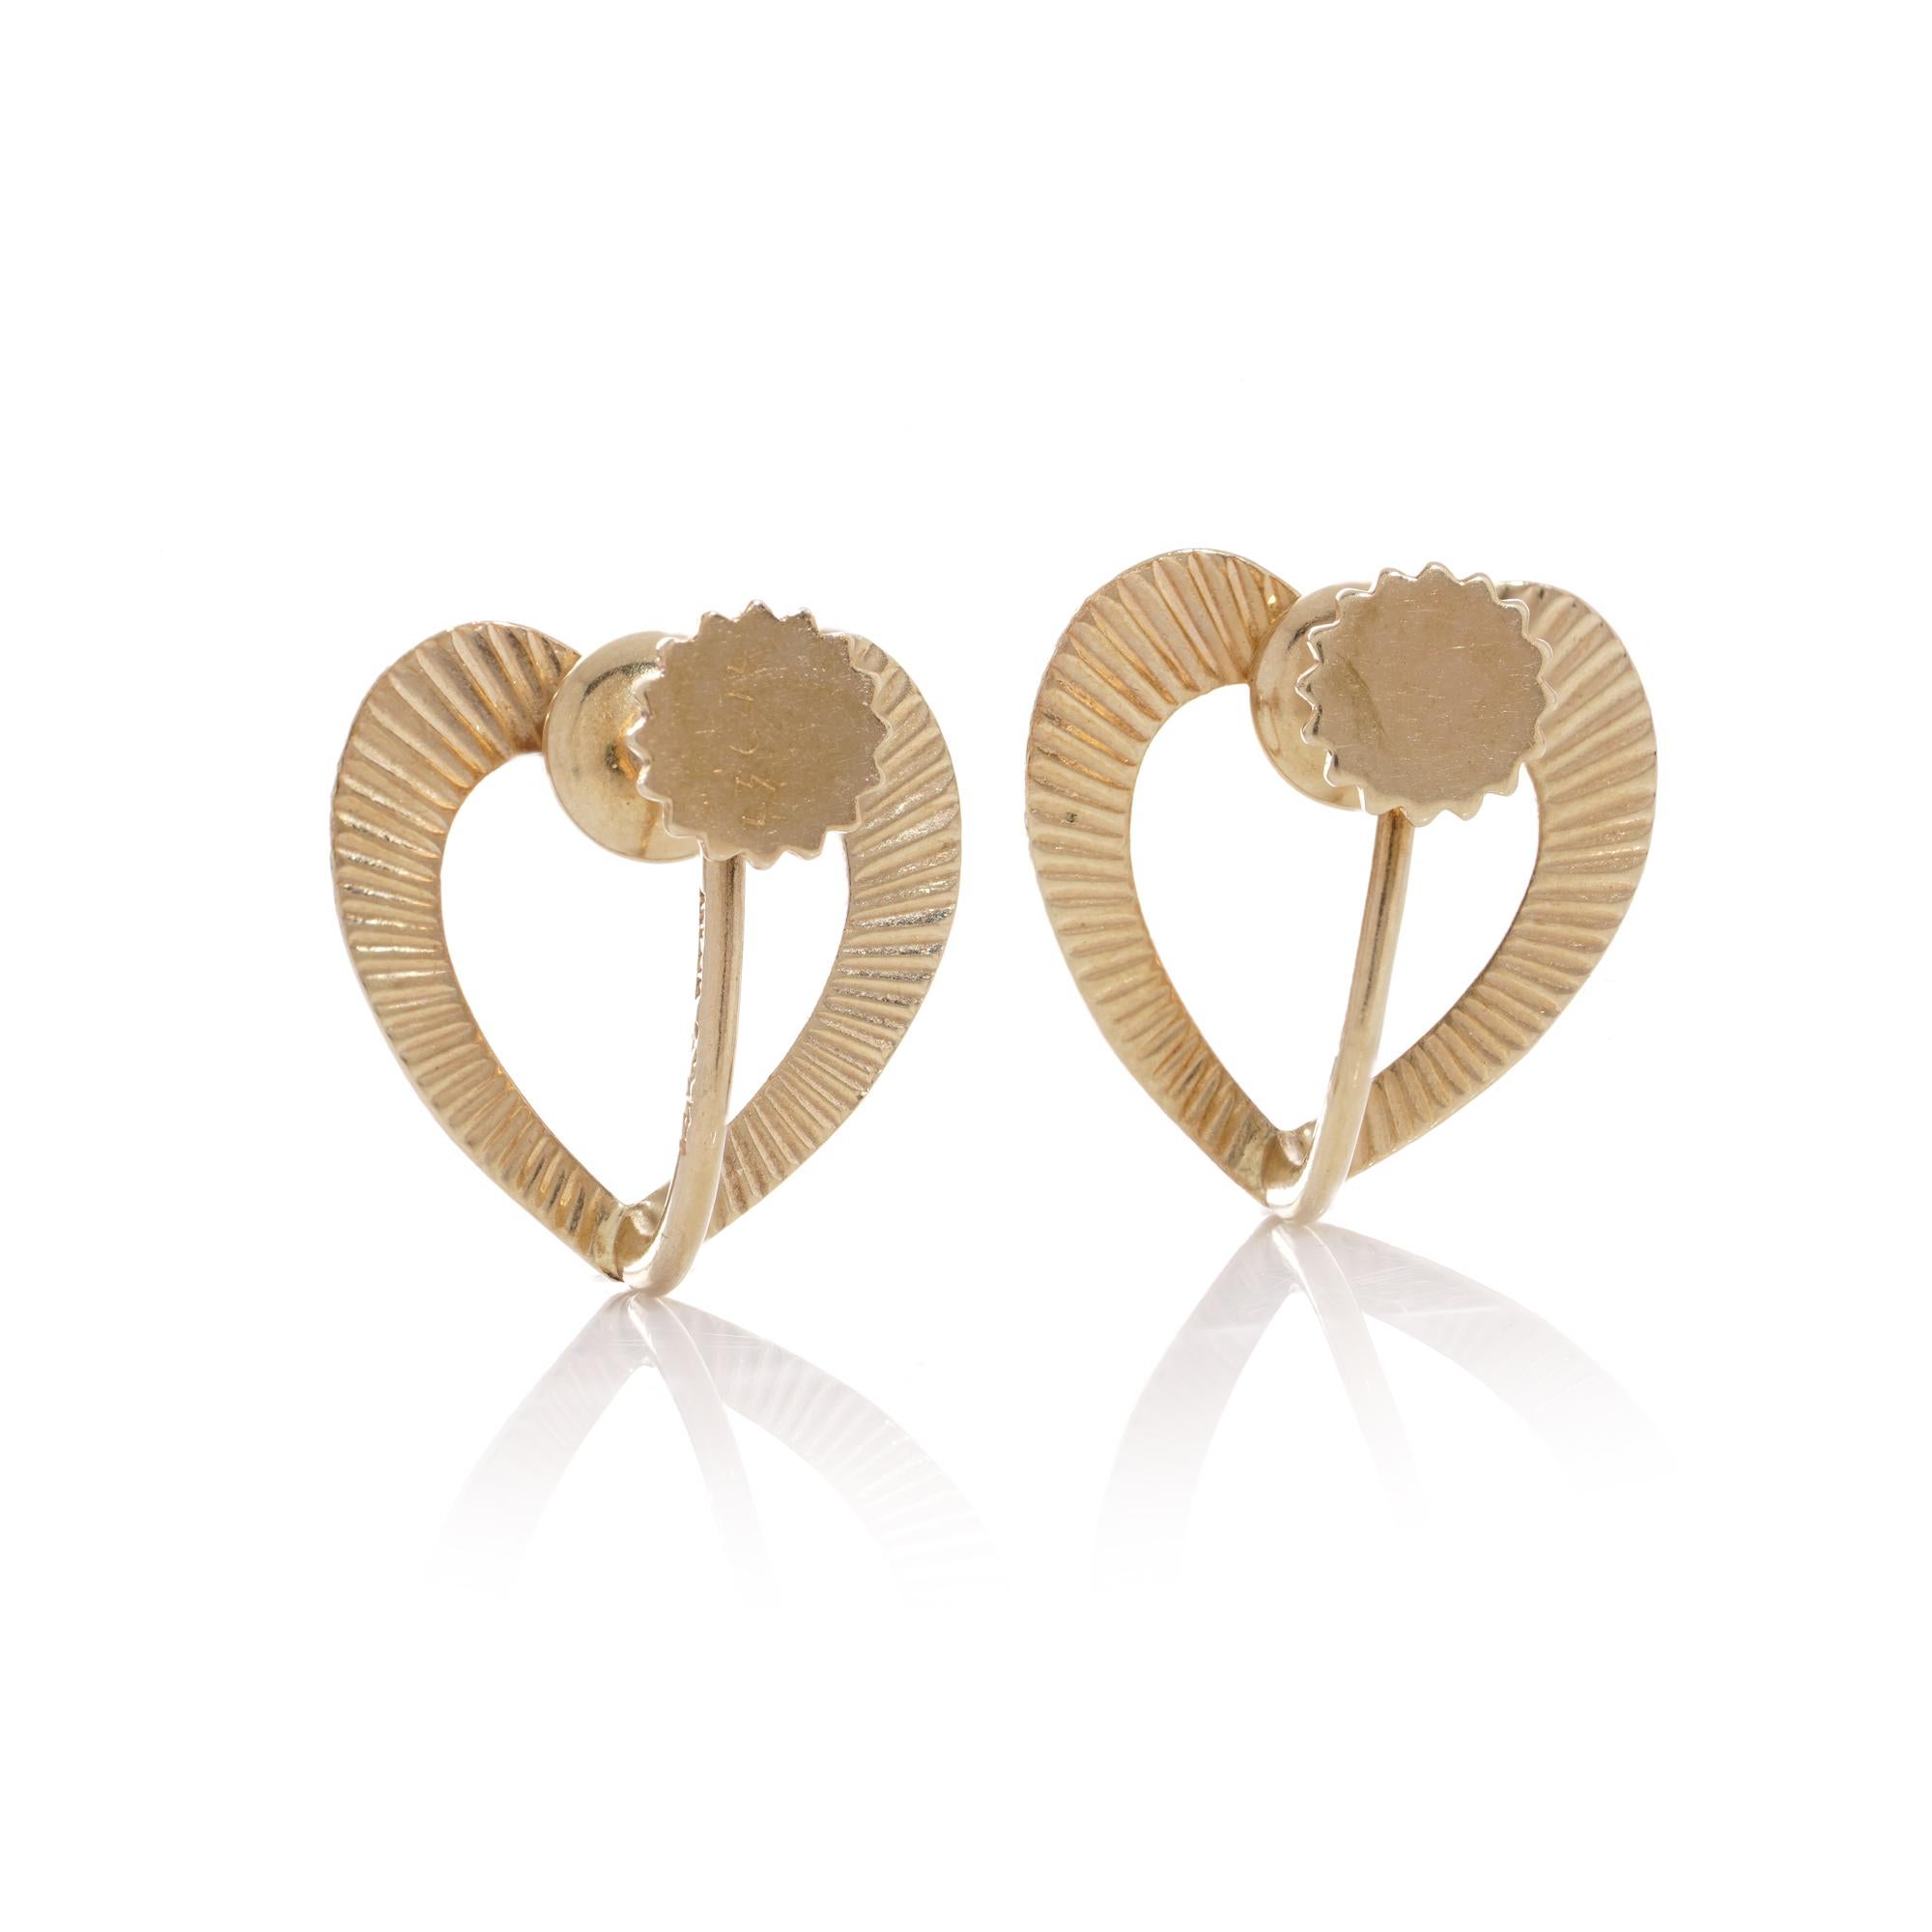 Tiffany & Co. 14kt. gold pair of heart fluted design earrings with screw - backs In Good Condition For Sale In Braintree, GB